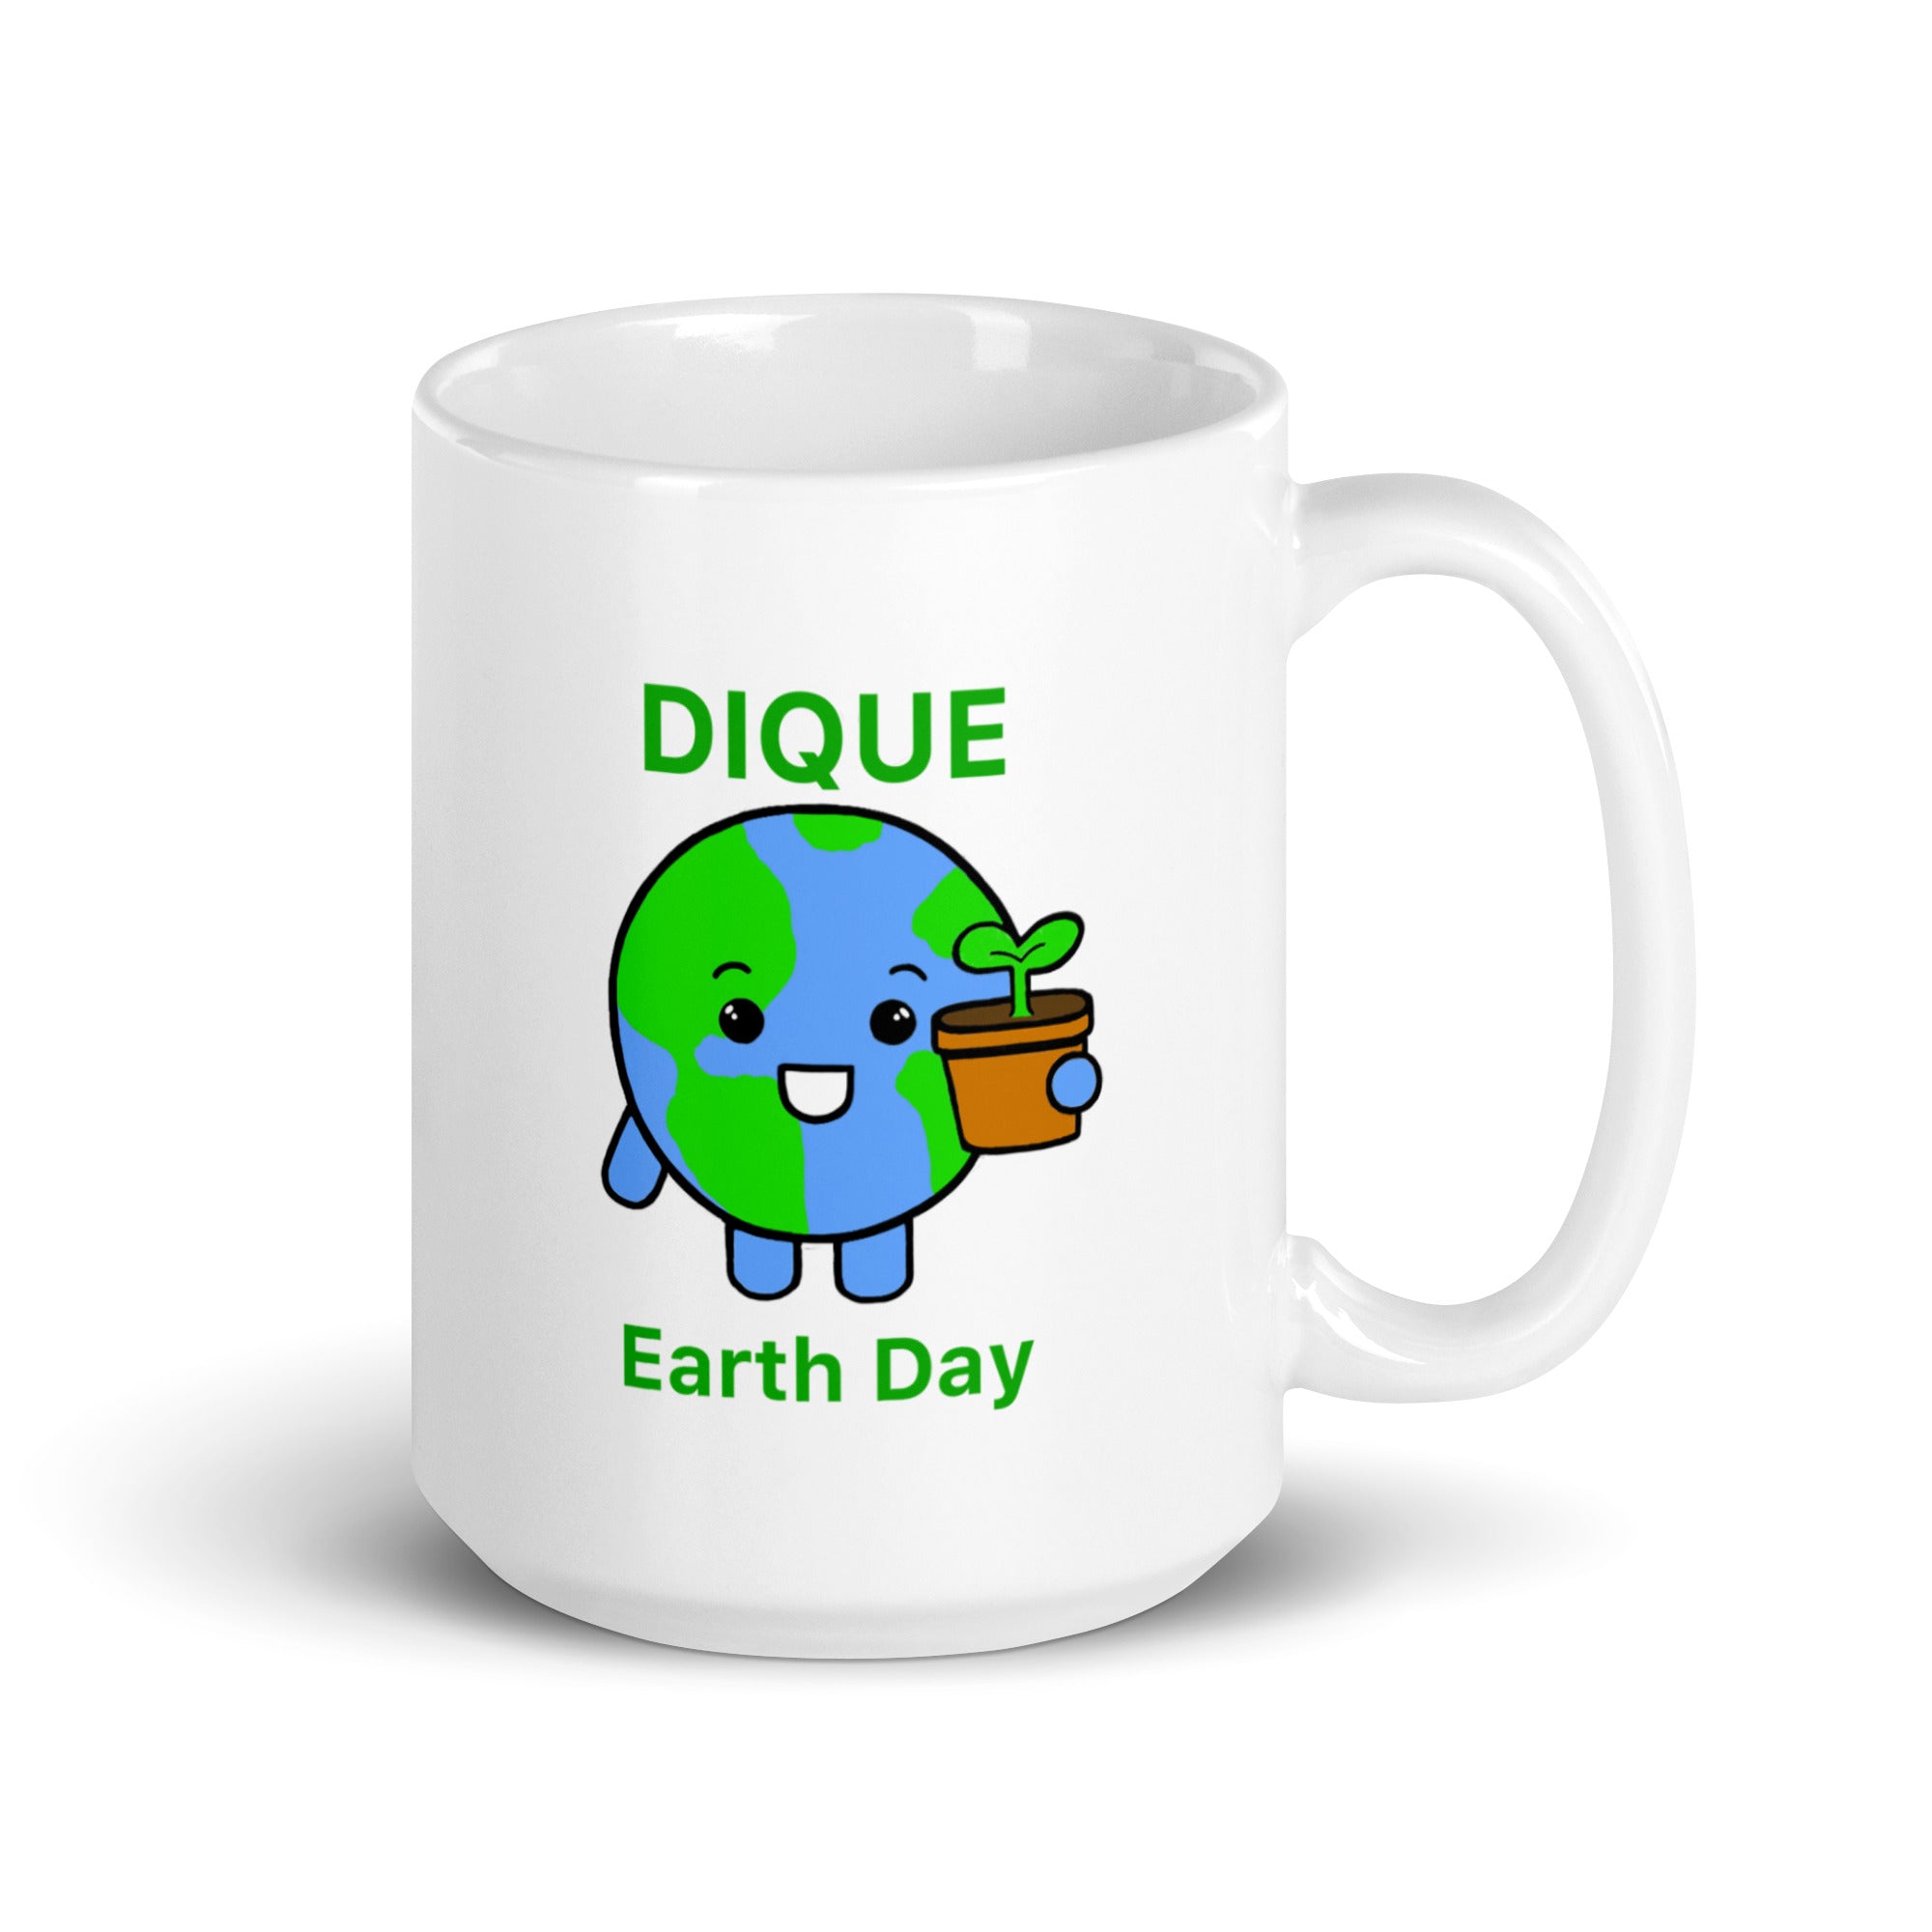 Dique Earth Day White glossy mug